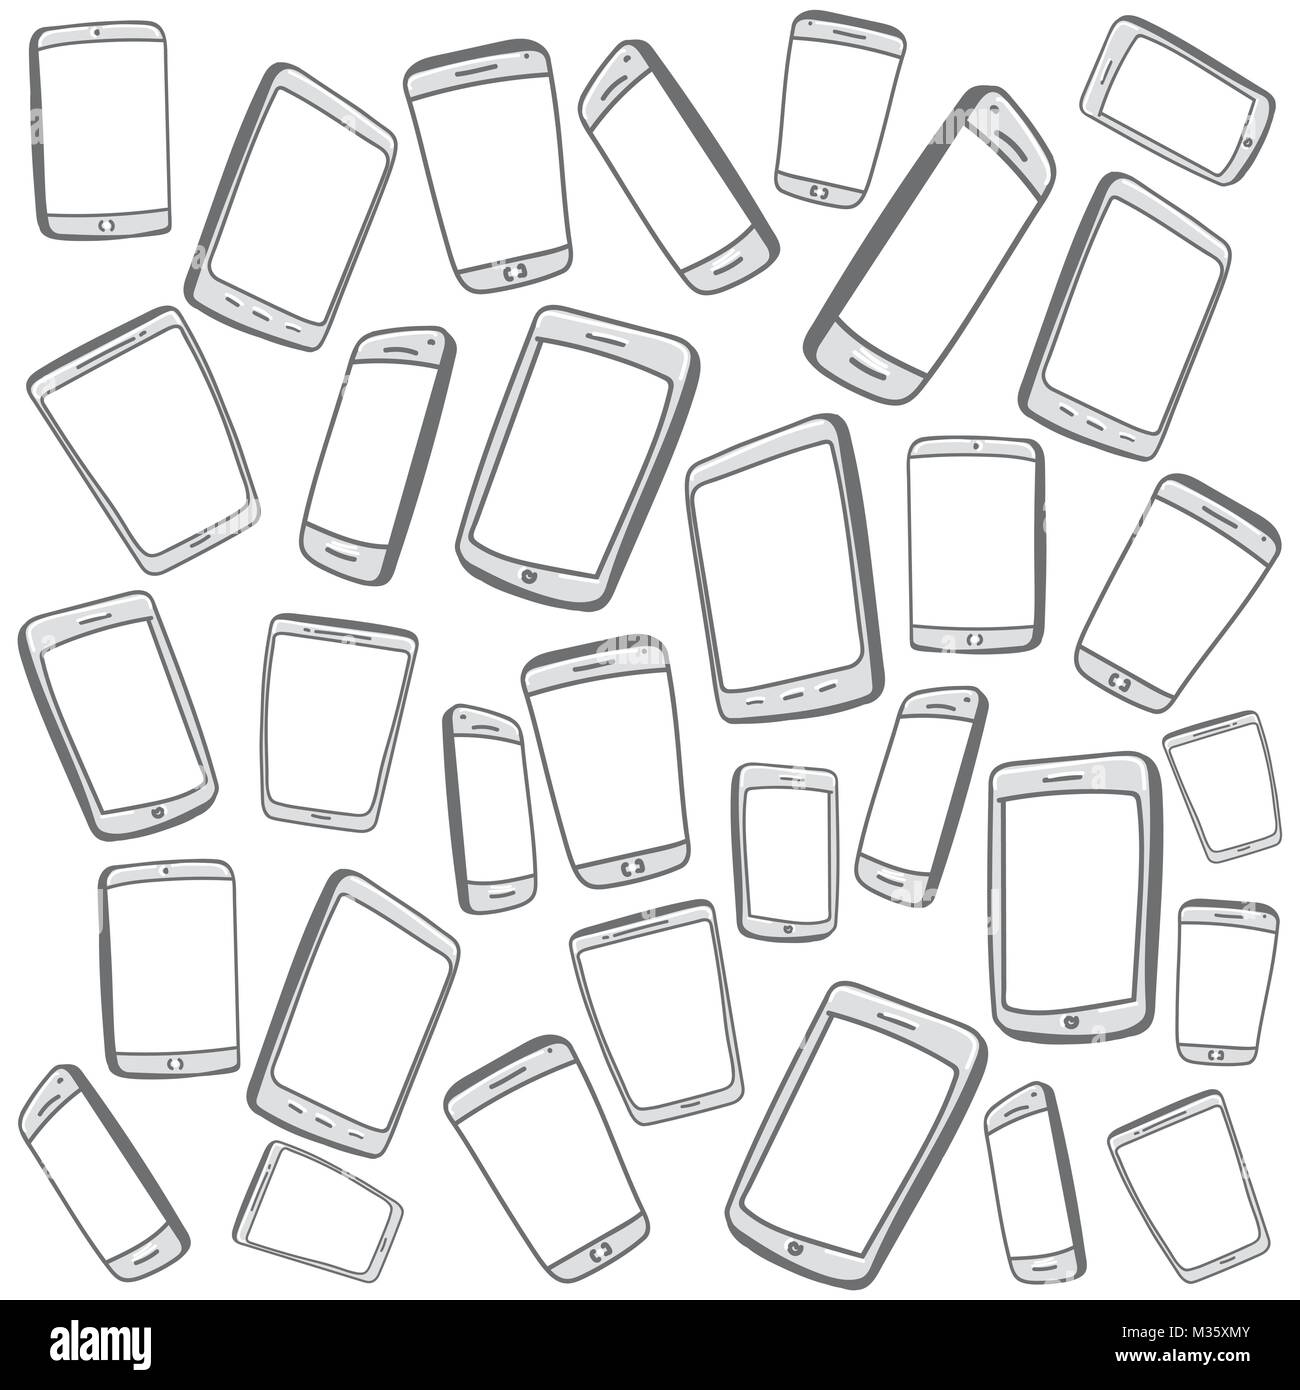 Hand drawn vector illustration of Mobile Phones and Digital Tablets background. Stock Vector